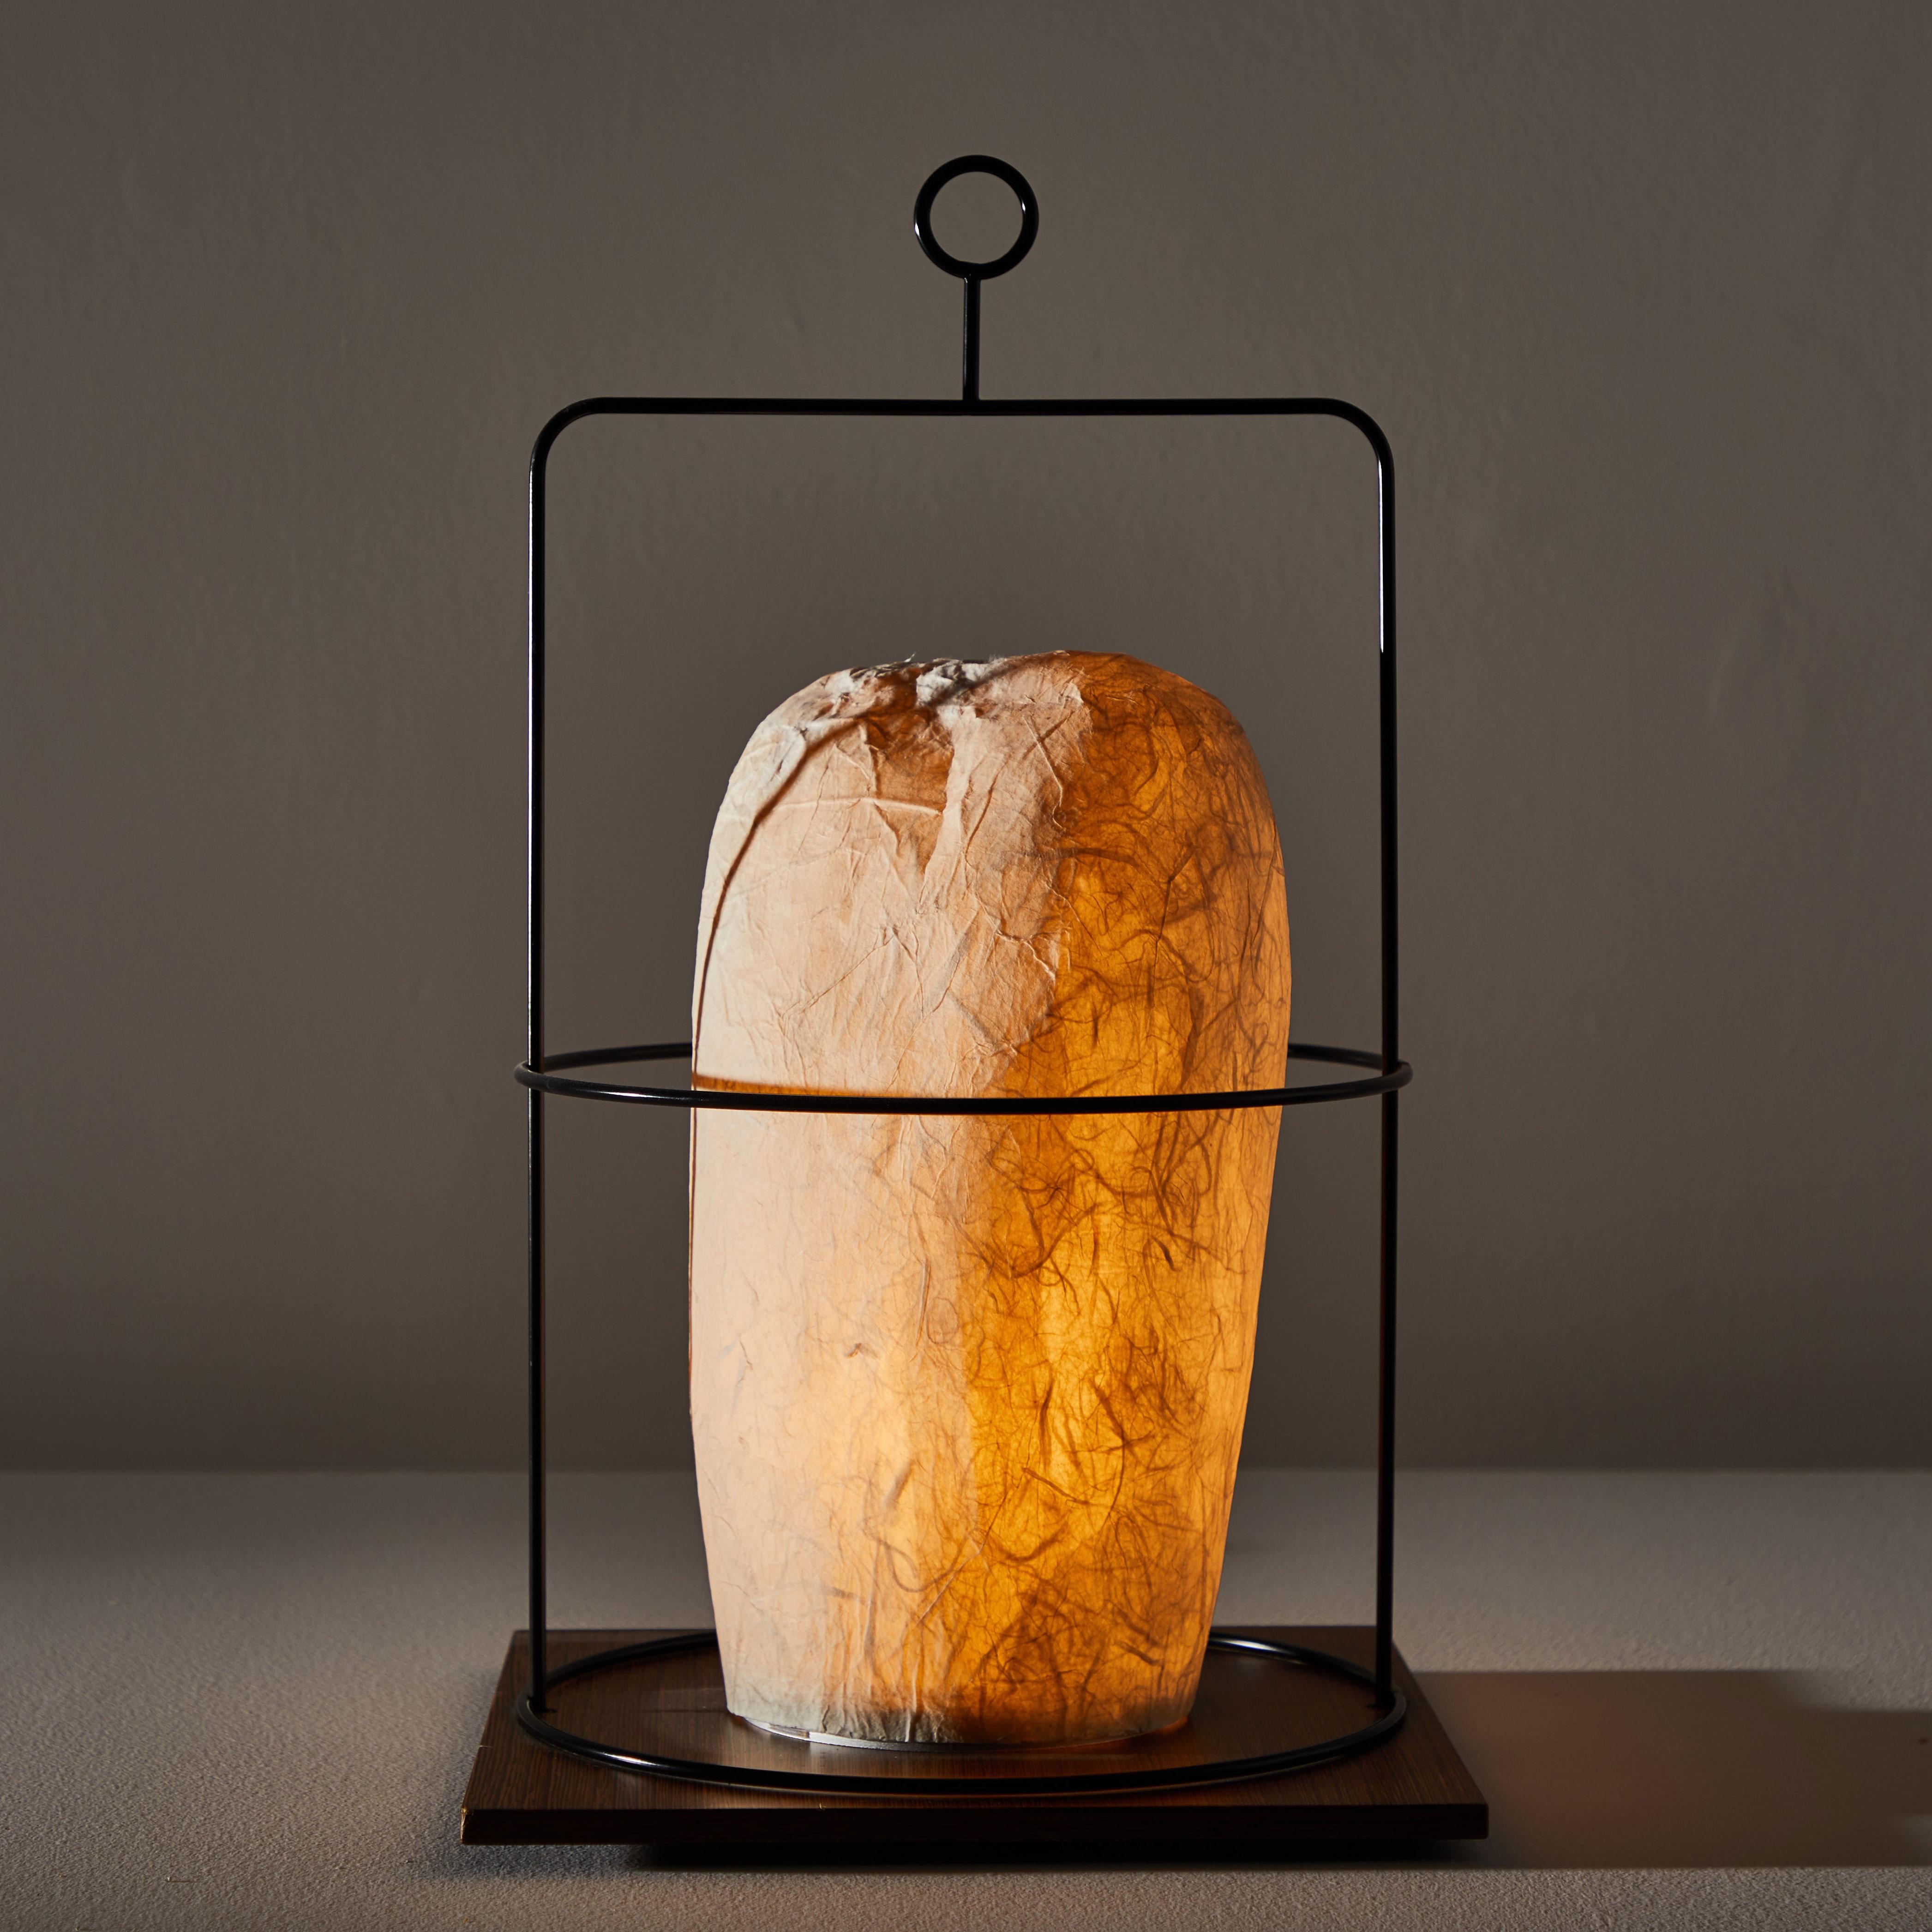 Model WL 01 D table lamp by Andrea Branzi. Designed and manufactured in Milan, 1995-1996. Black metal wire, wood, rice paper. Original cord. Takes one E27 25w maximum bulb. Bulbs provided as a one time courtesy. Literature: Fiell, Charlotte & Peter,